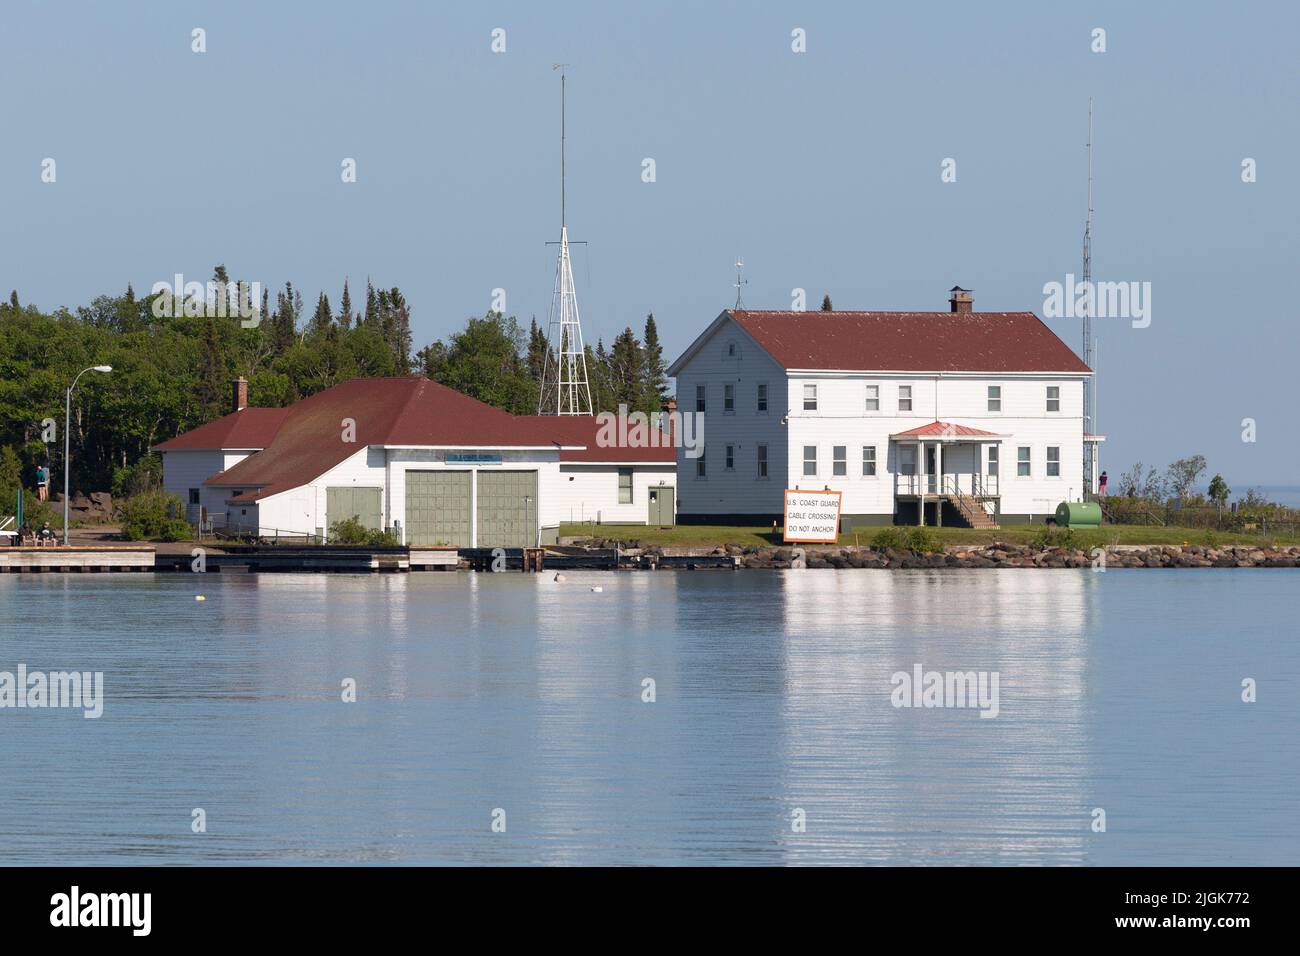 The 1928 Station House of the Department of Homeland Security U.S. Coast Guard Station North Superior at Grand Marais harbor, Minnesota. Stock Photo